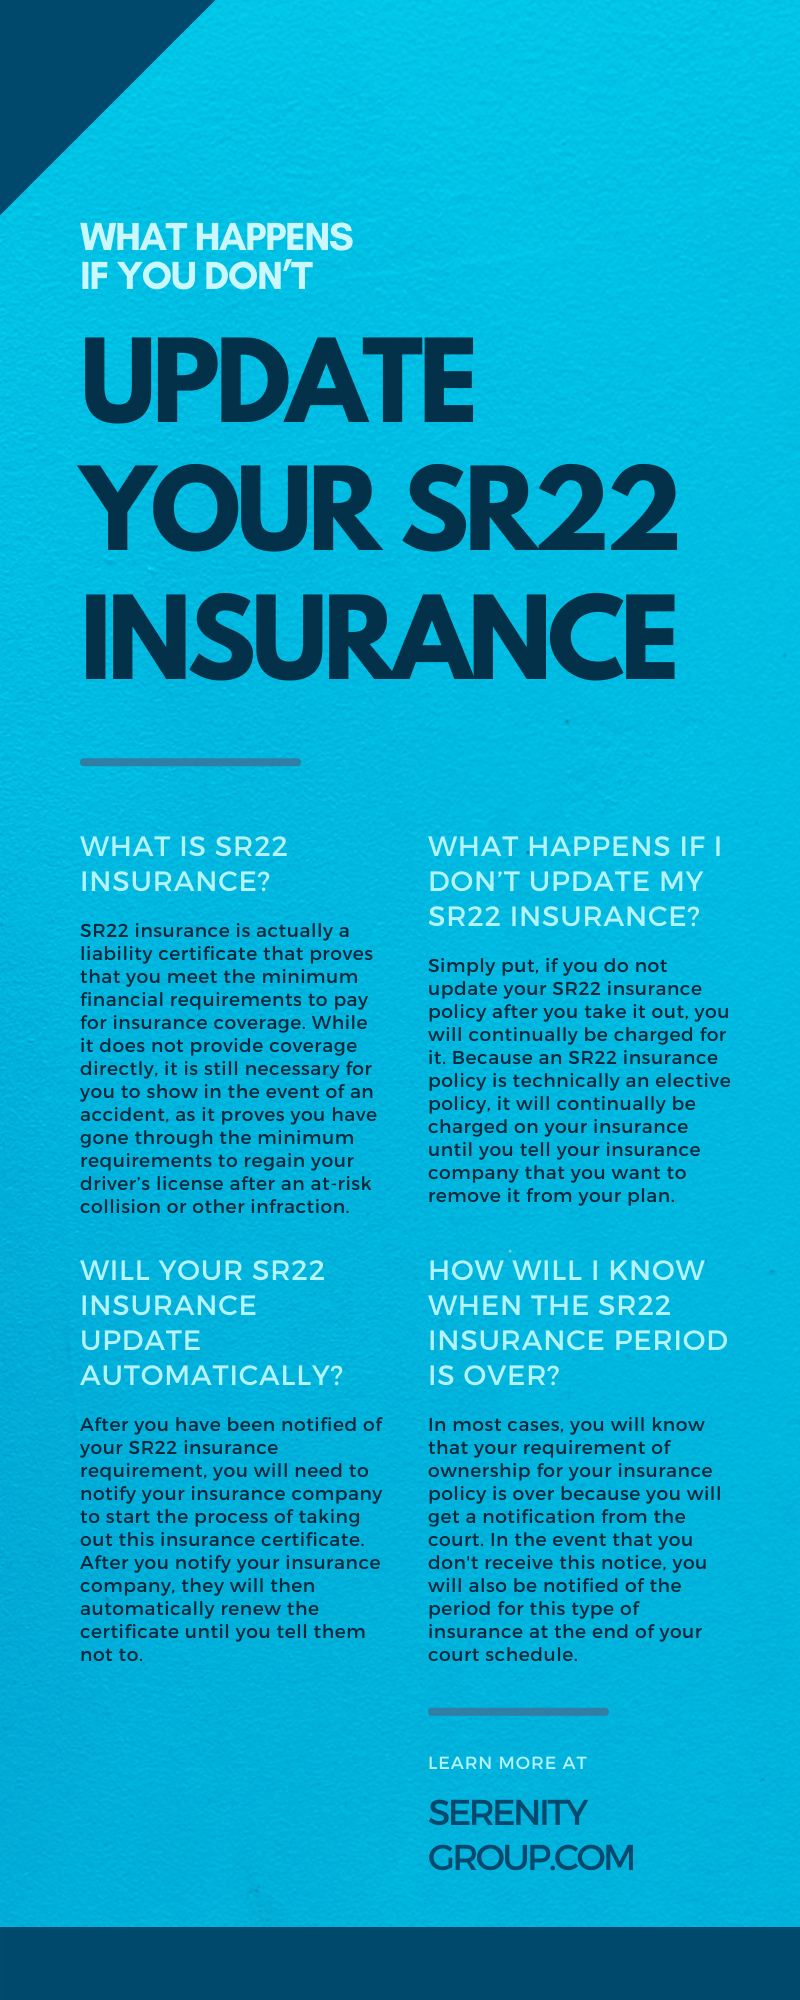 What Happens if You Don’t Update Your SR22 Insurance